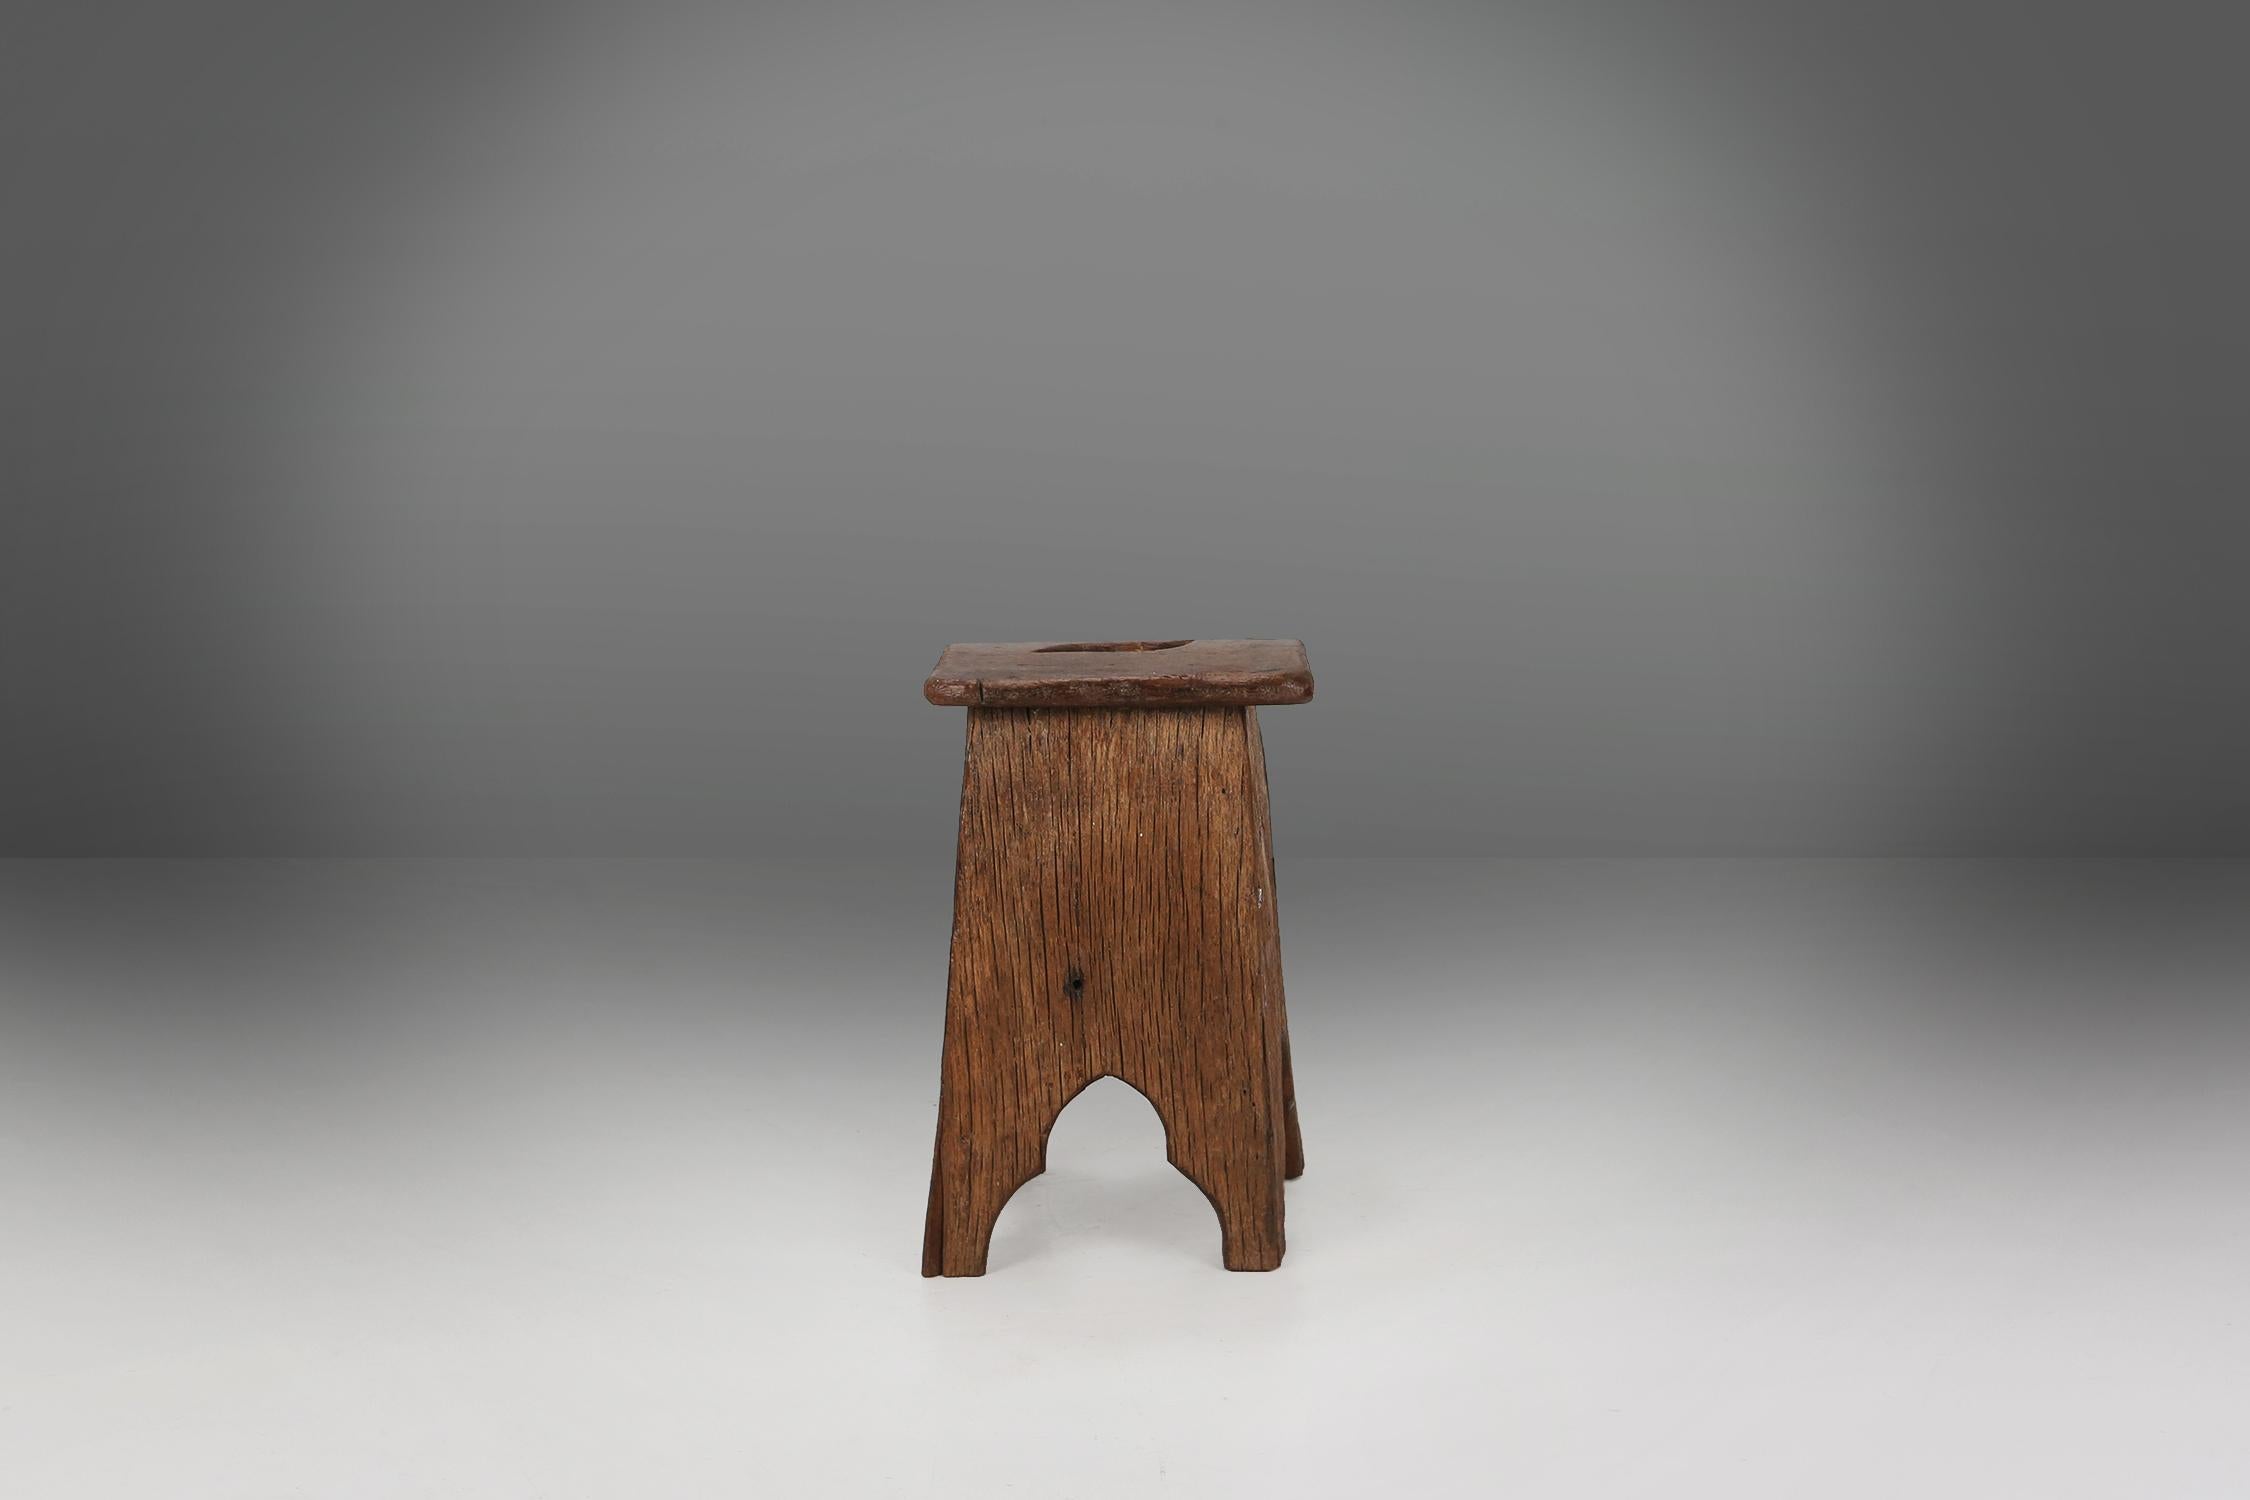 Rustic wabi sabi style stool made of solid wood made around 1850.
Has some nice details in the legs and a handle on the top.